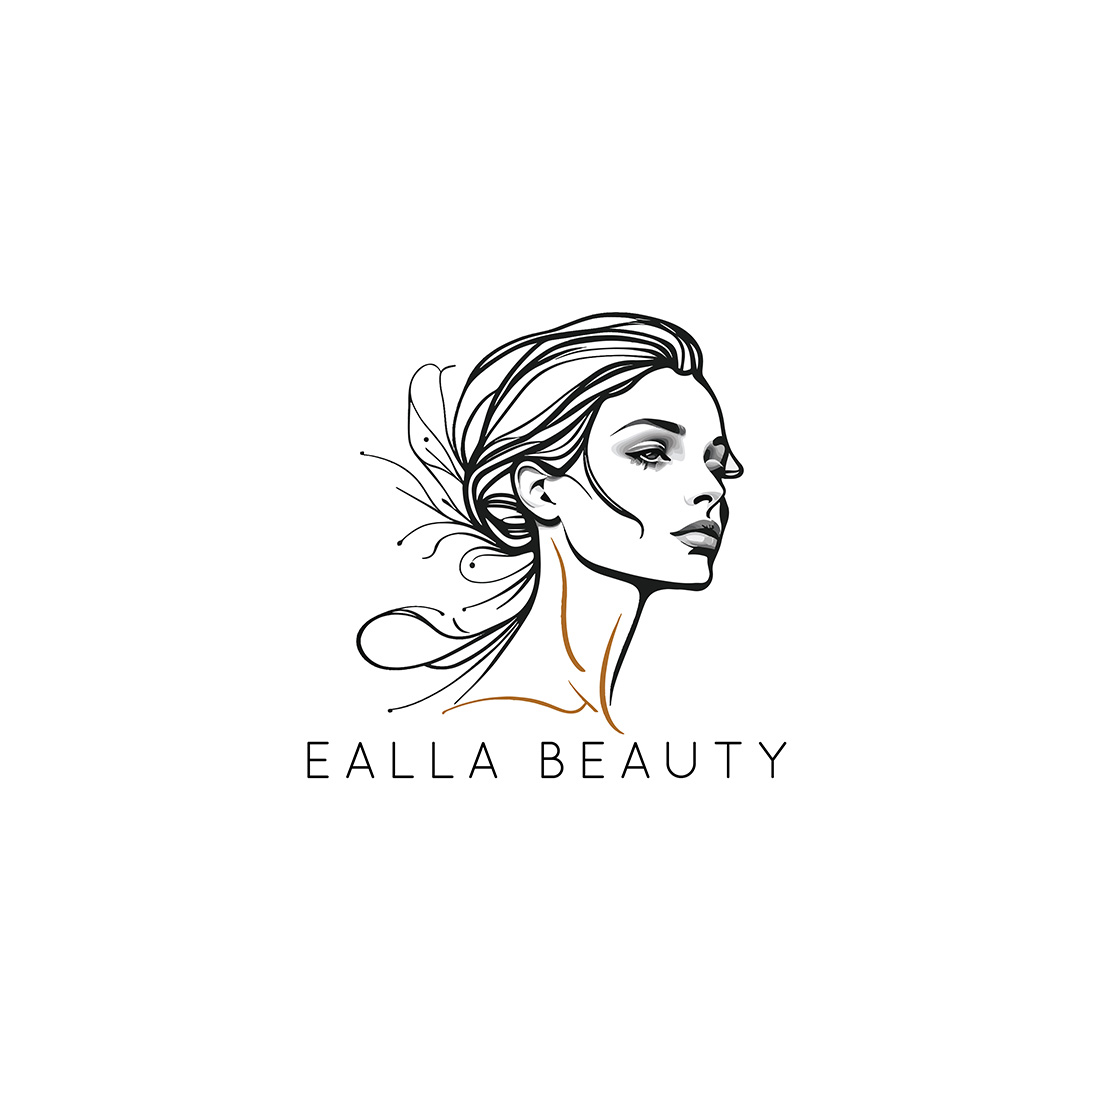 Letter a beauty face logo design icon Royalty Free Vector